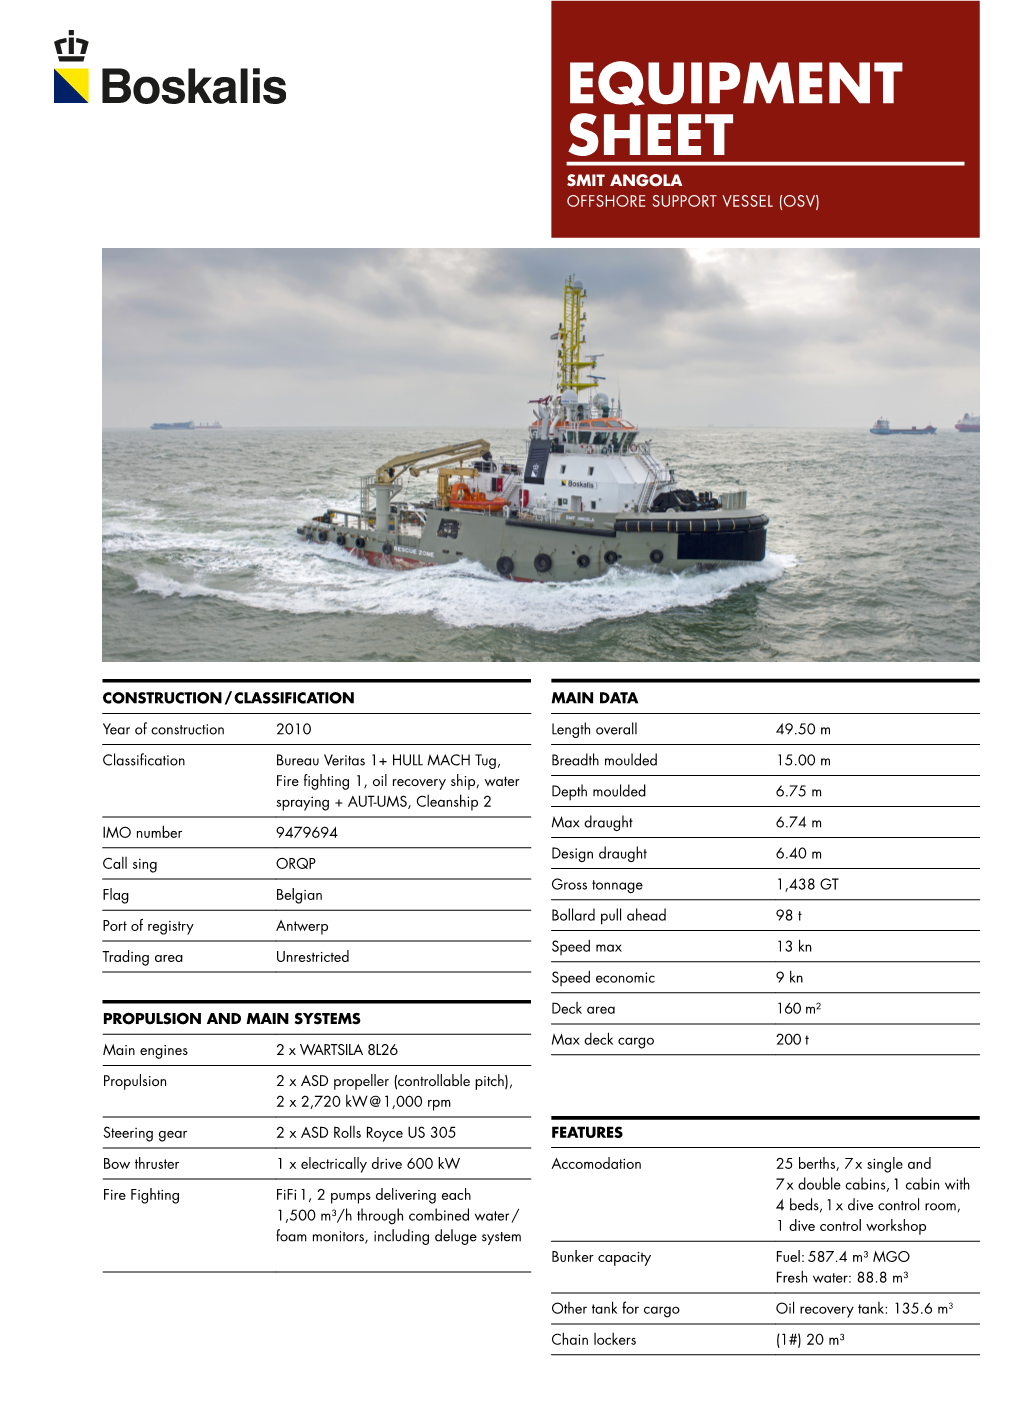 Equipment Sheet Smit Angola Offshore Support Vessel (Osv)